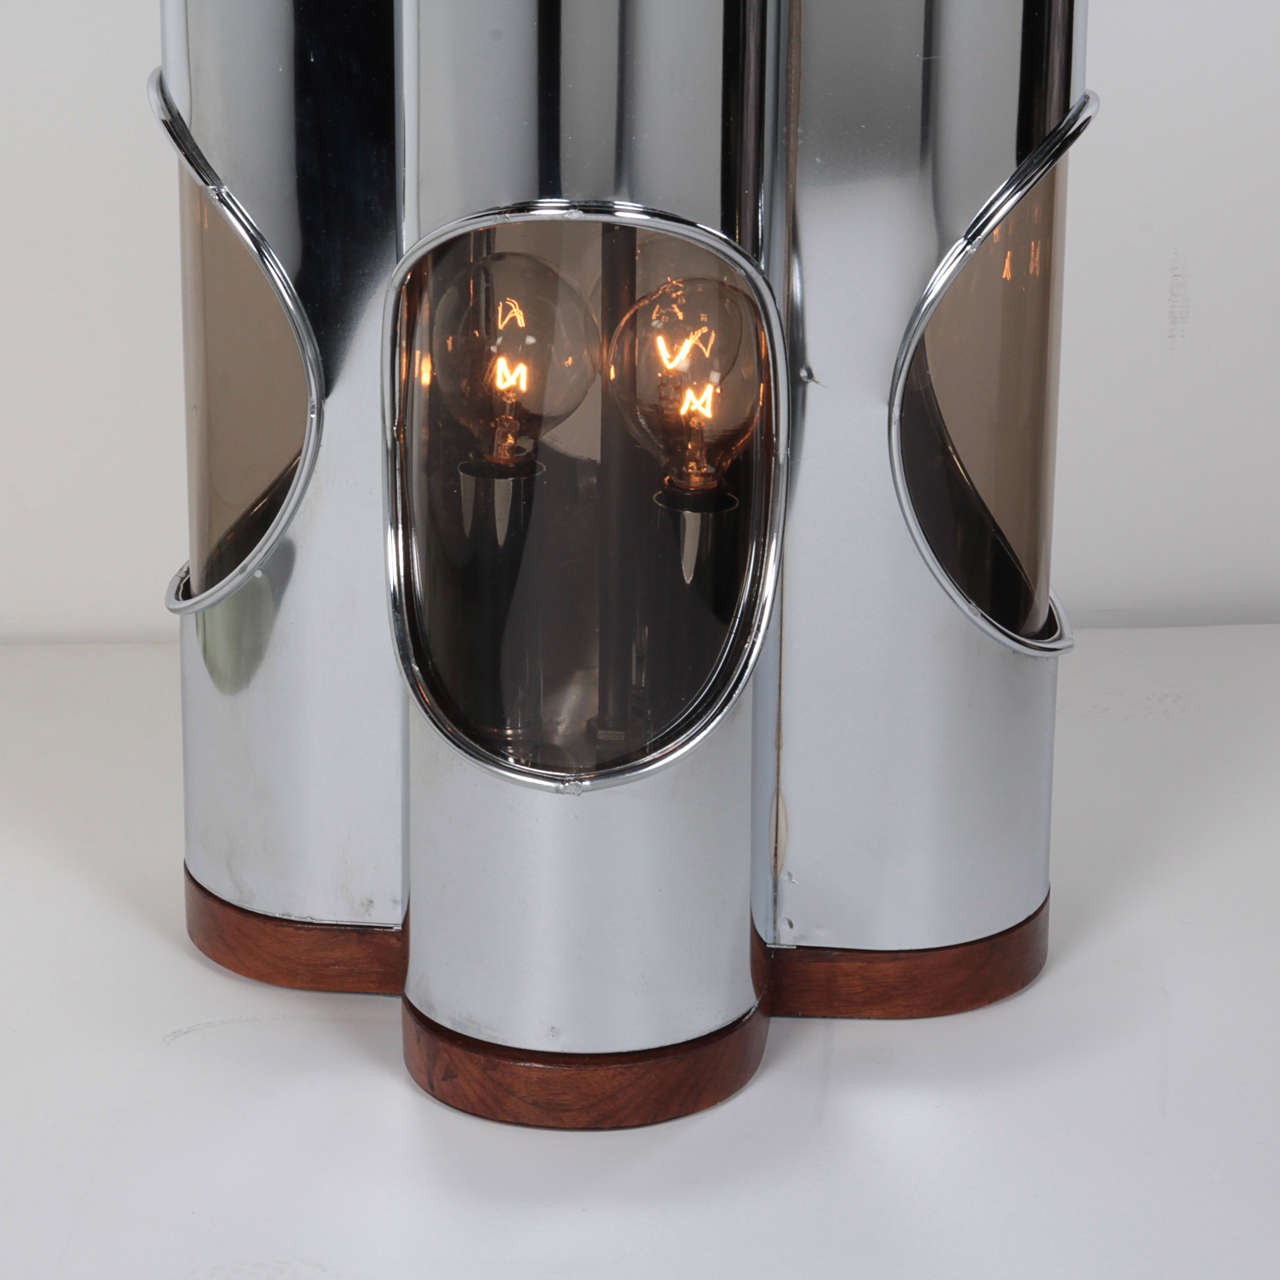 Mid-20th Century Pair of Sculptural Mid-Century Modern Chrome Lamps by Laurel, circa 1960s For Sale